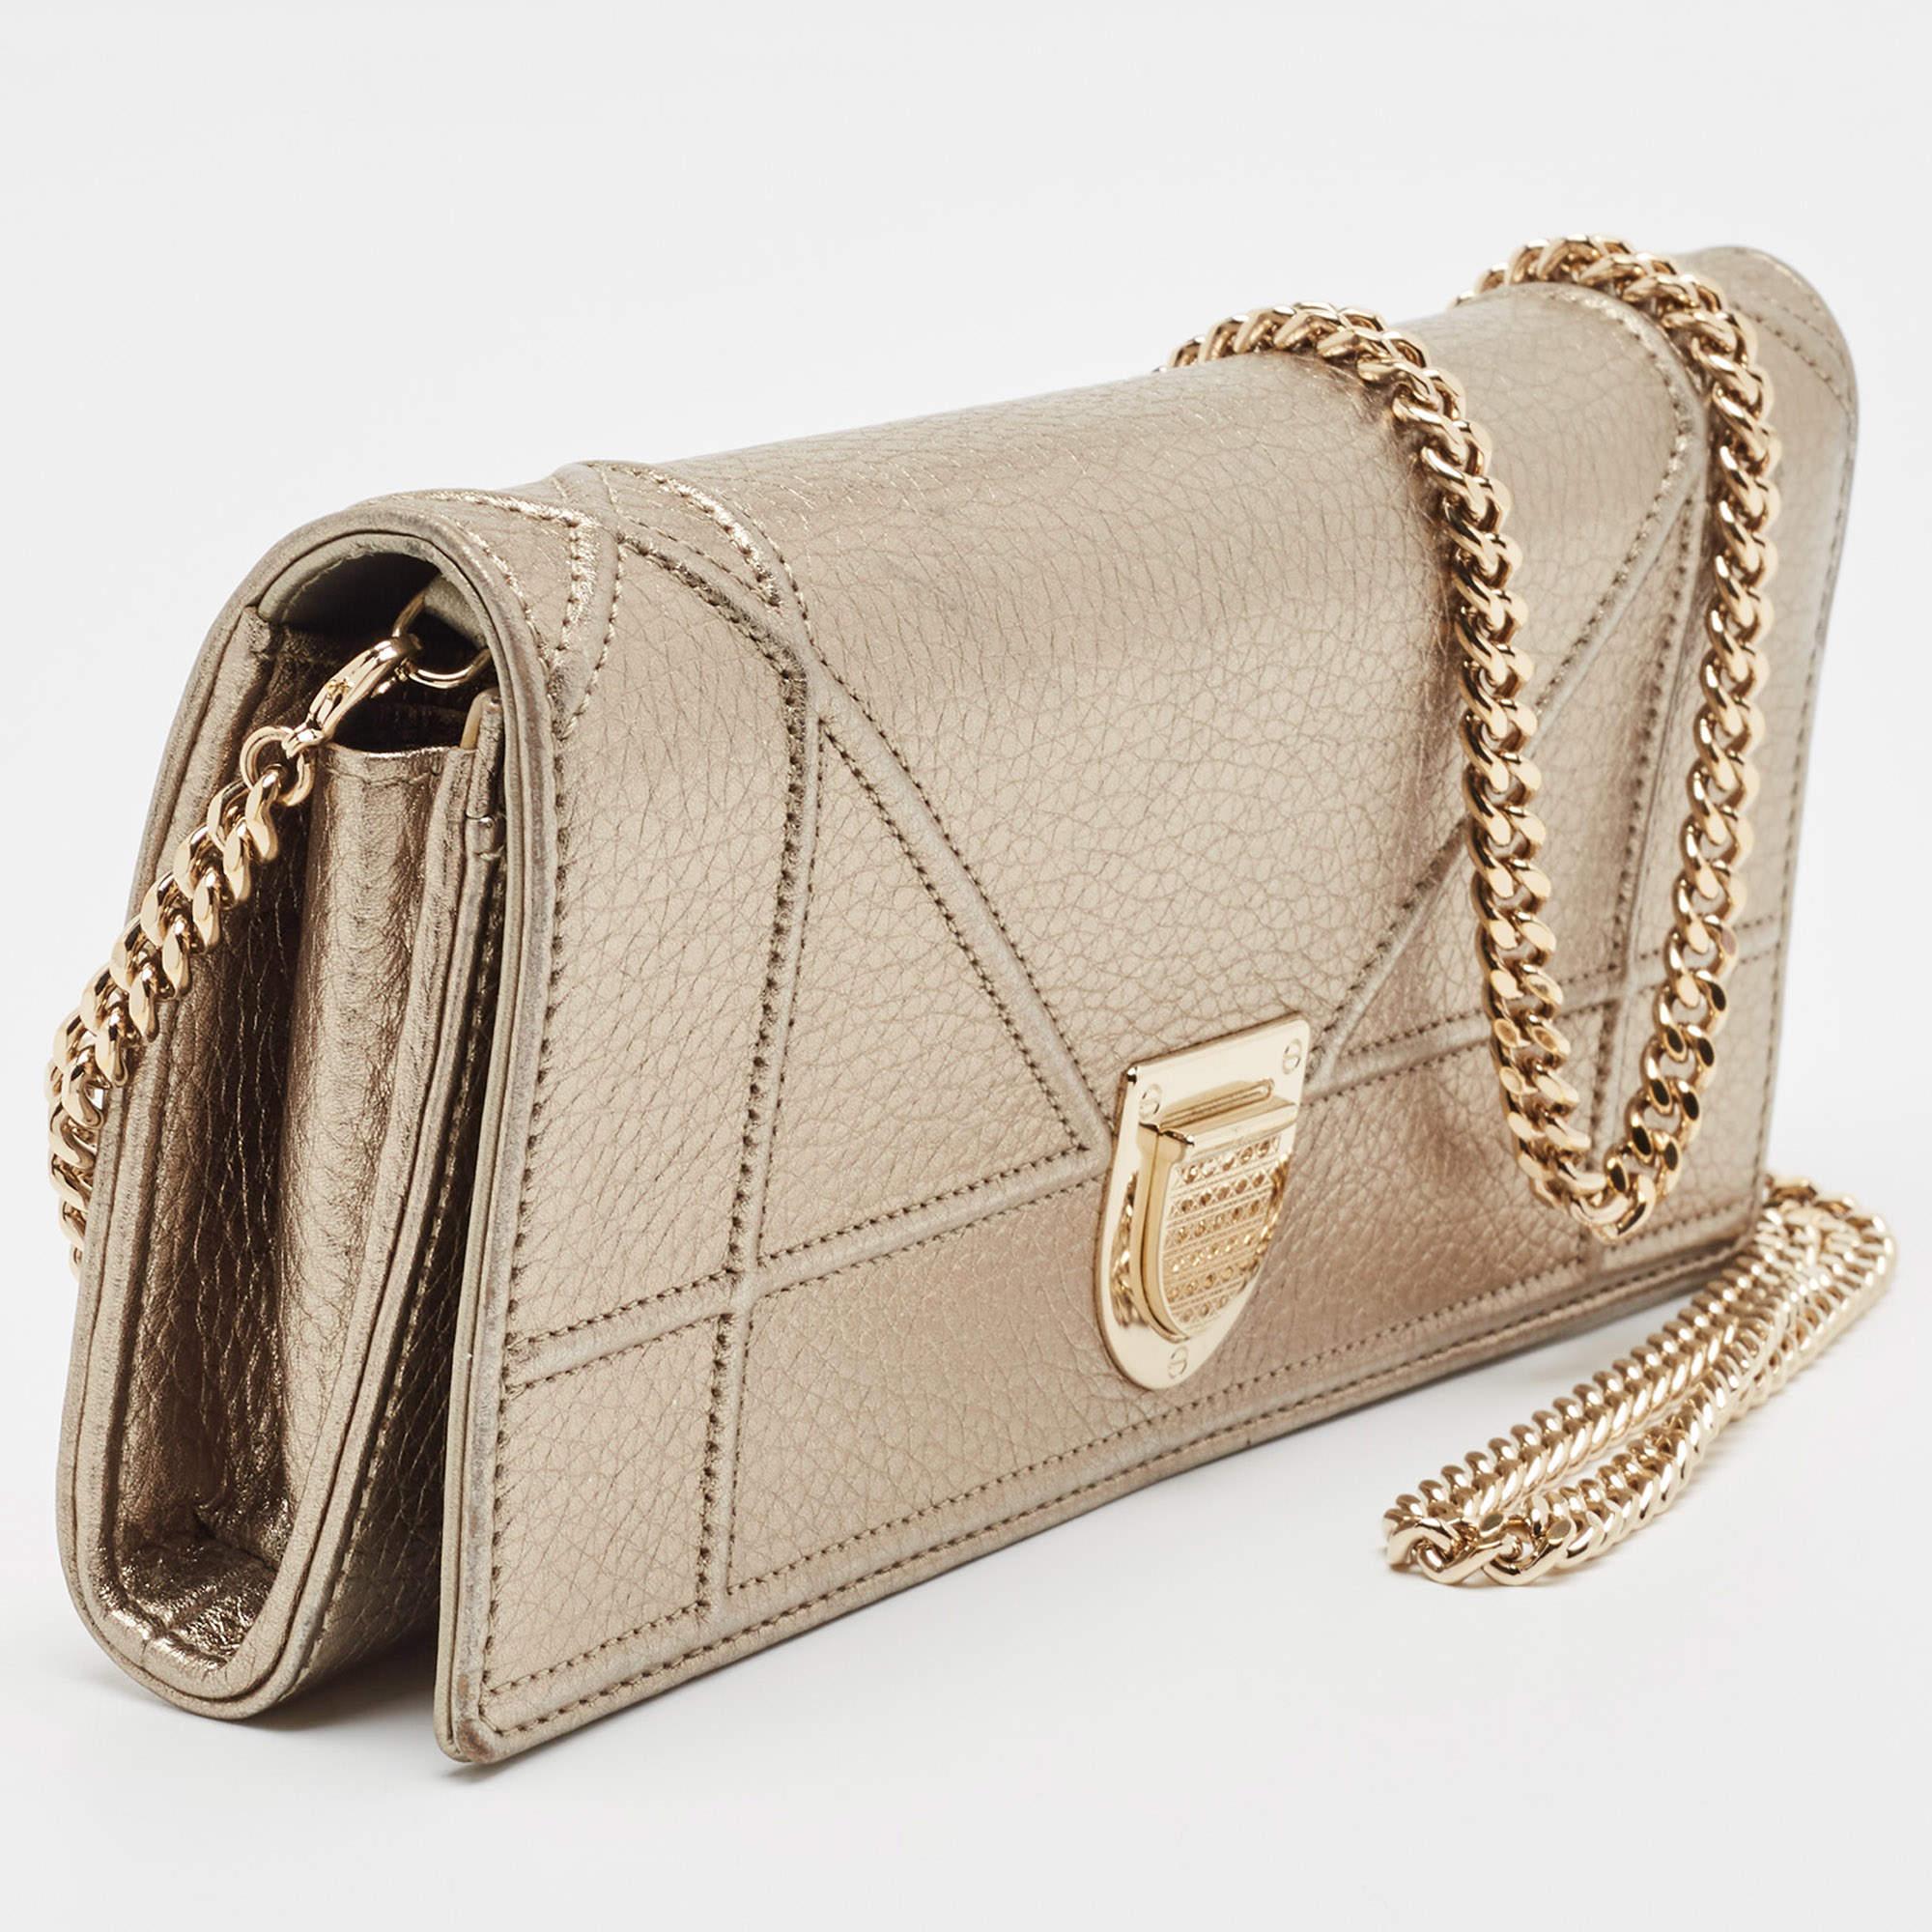 Trust this Dior bag to be light, durable, and comfortable to carry. It is crafted beautifully using the best materials to be a durable style ally.

